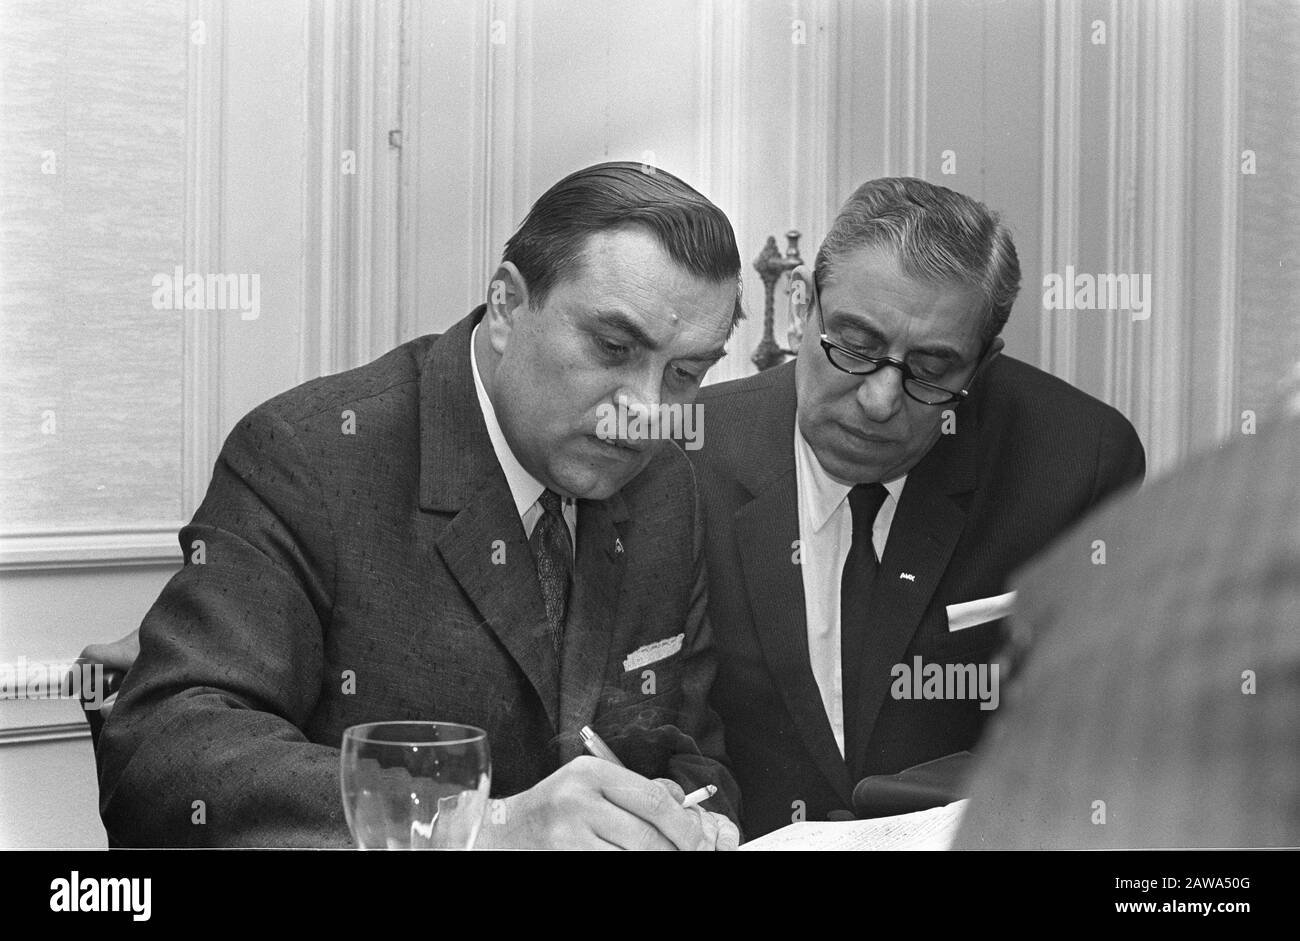 Draw for semi-final European Cup No. 32, 33, 34:. Prague (right) and Zachar Date: March 21, 1969 Keywords: lotteries, sports, soccer institution Name: European Cup Stock Photo